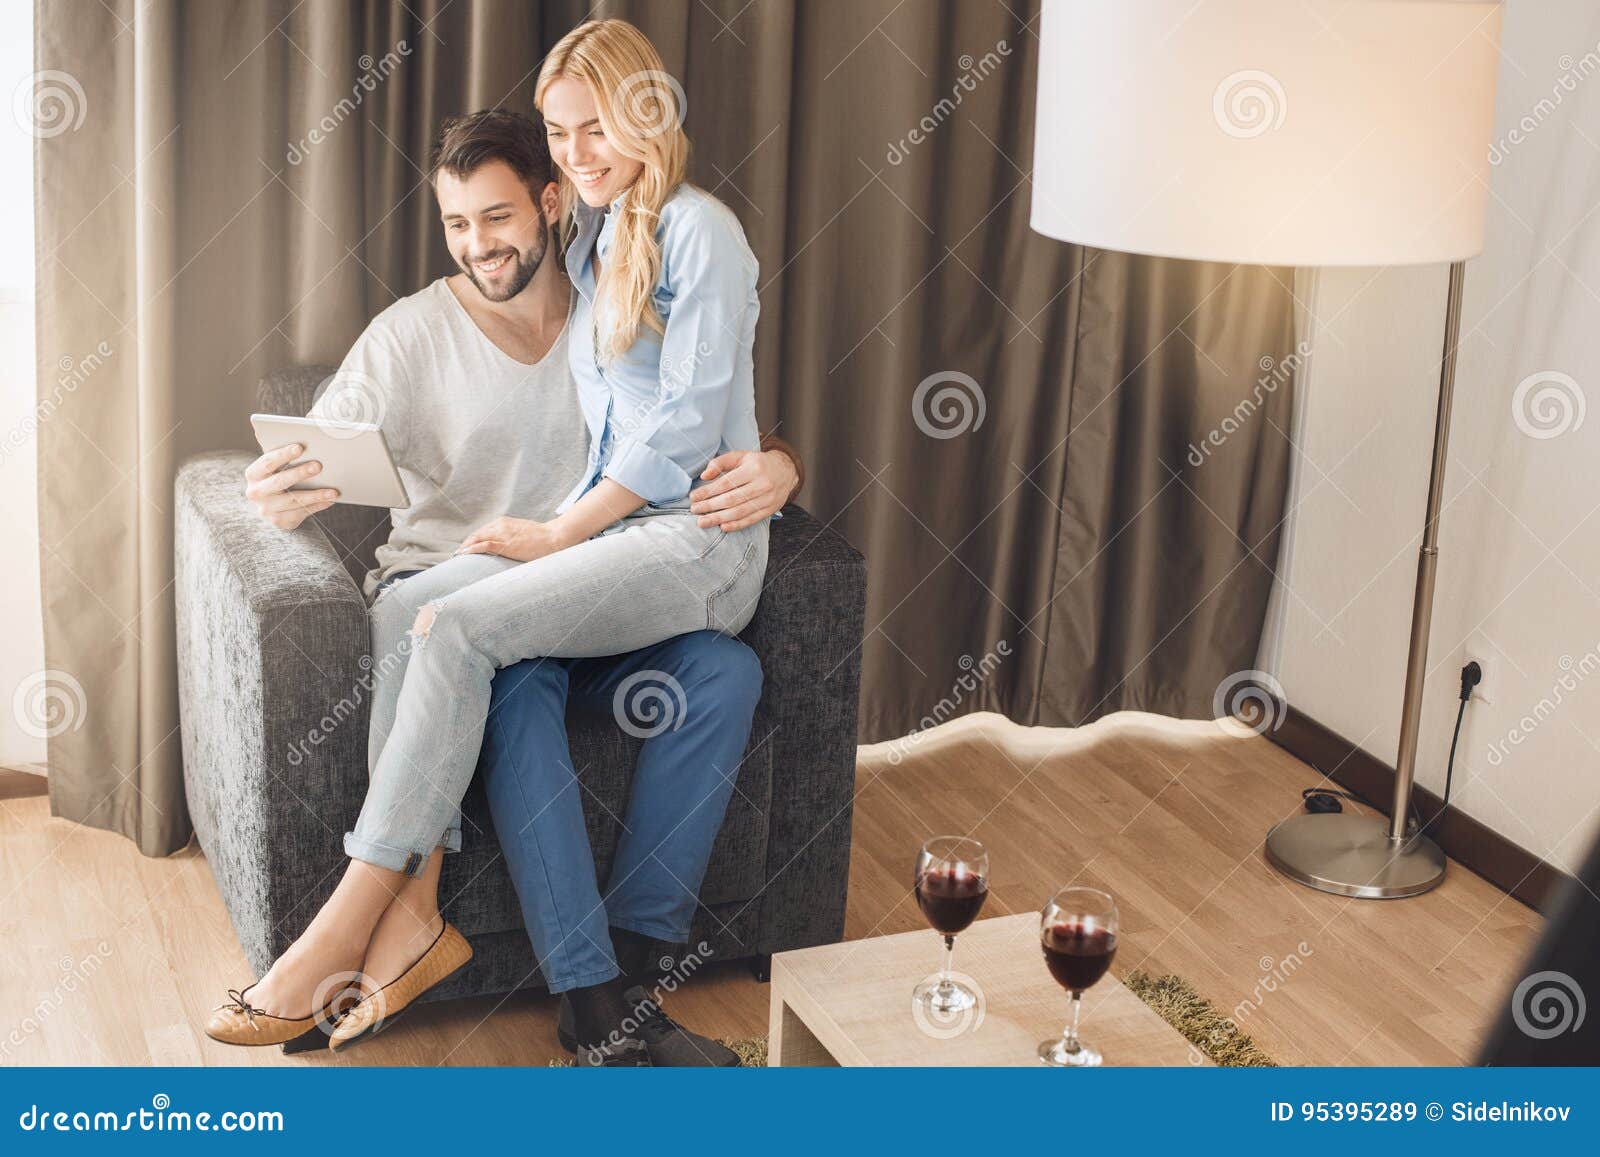 Young Couple Travel Together Hotel Room Leisure Stock Image Image Of